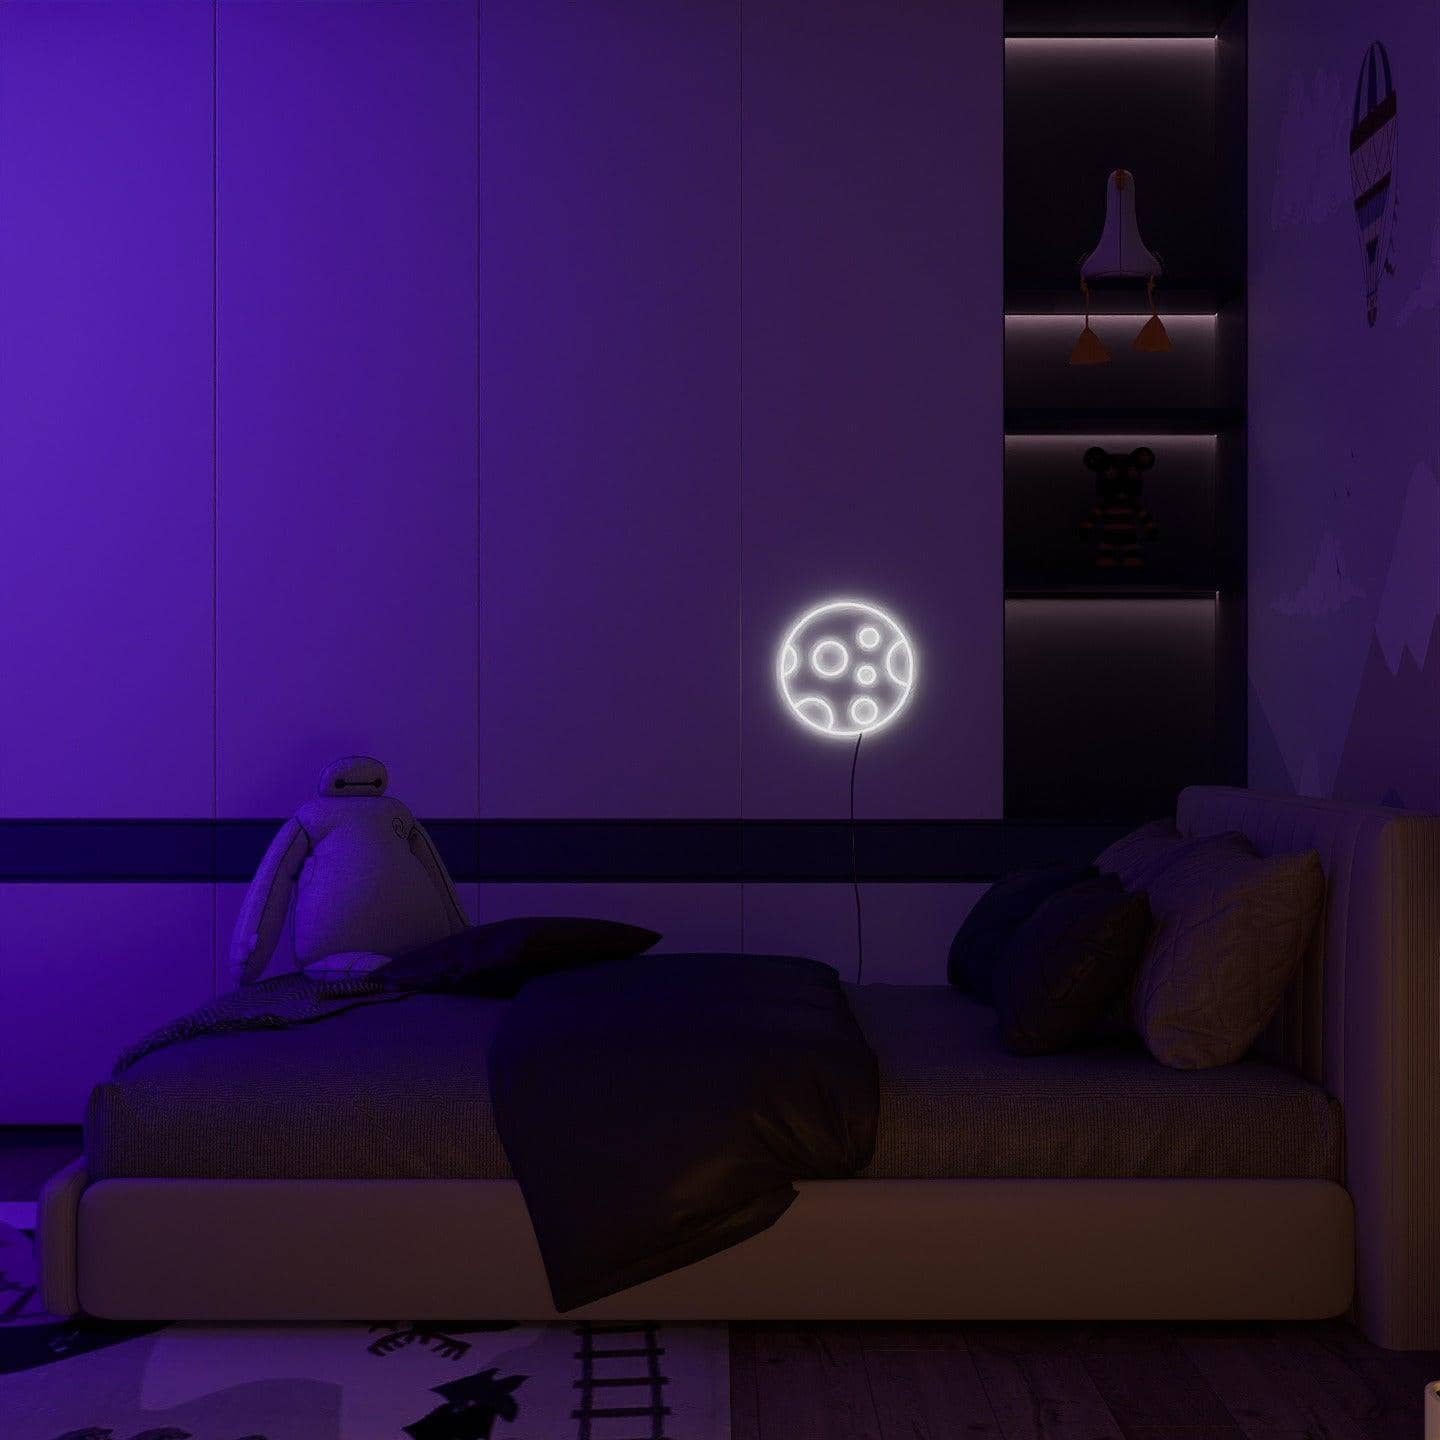 light-up-neon-lights-and-hang-them-in-your-bedroom-for-display-moon